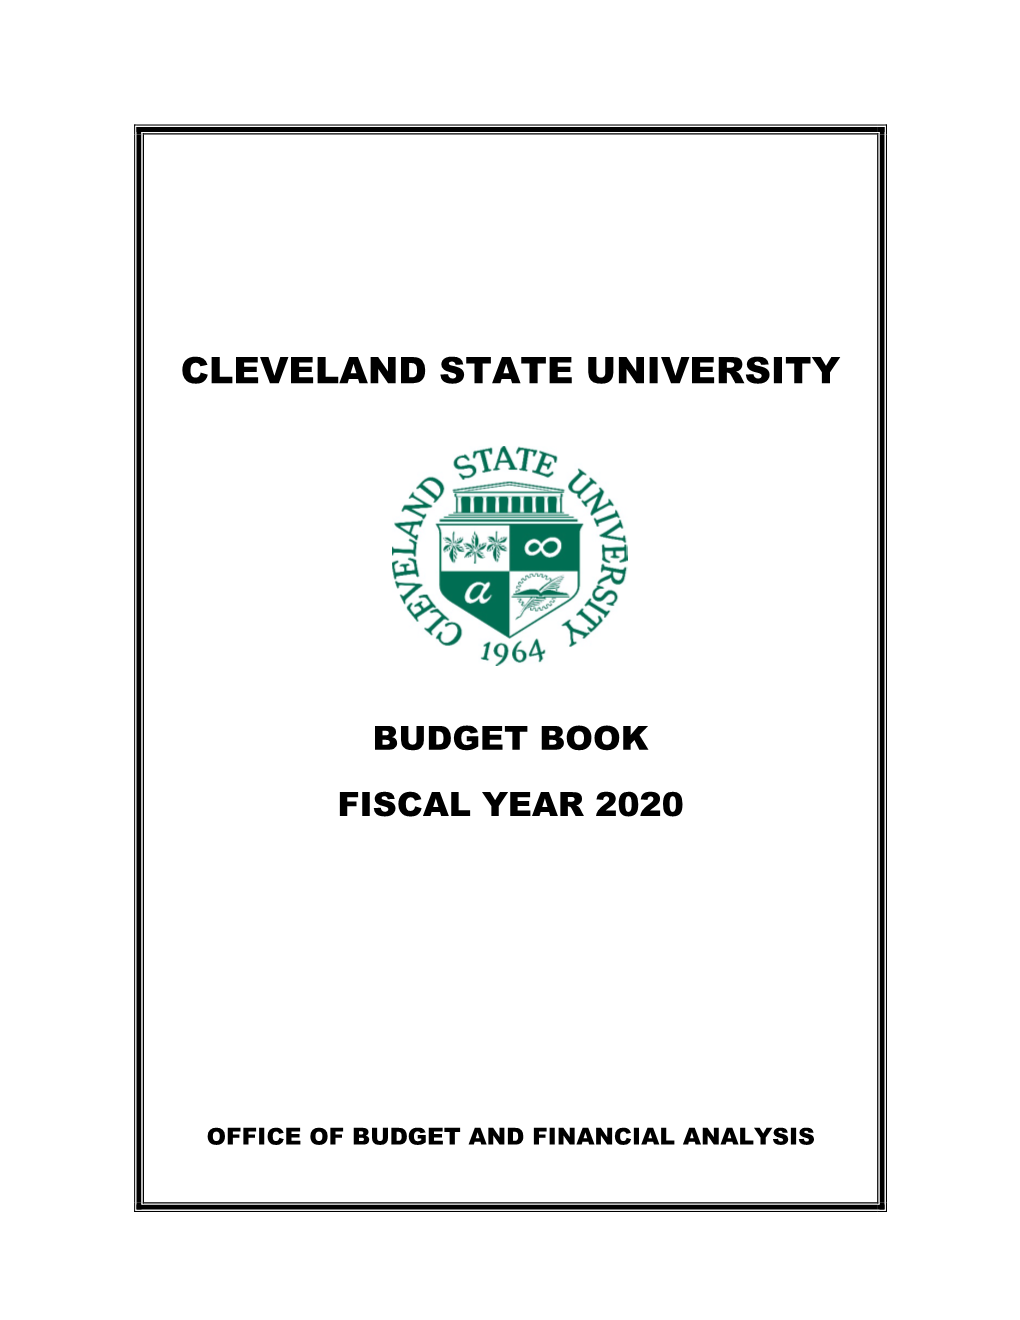 Budget Book Fiscal Year 2020